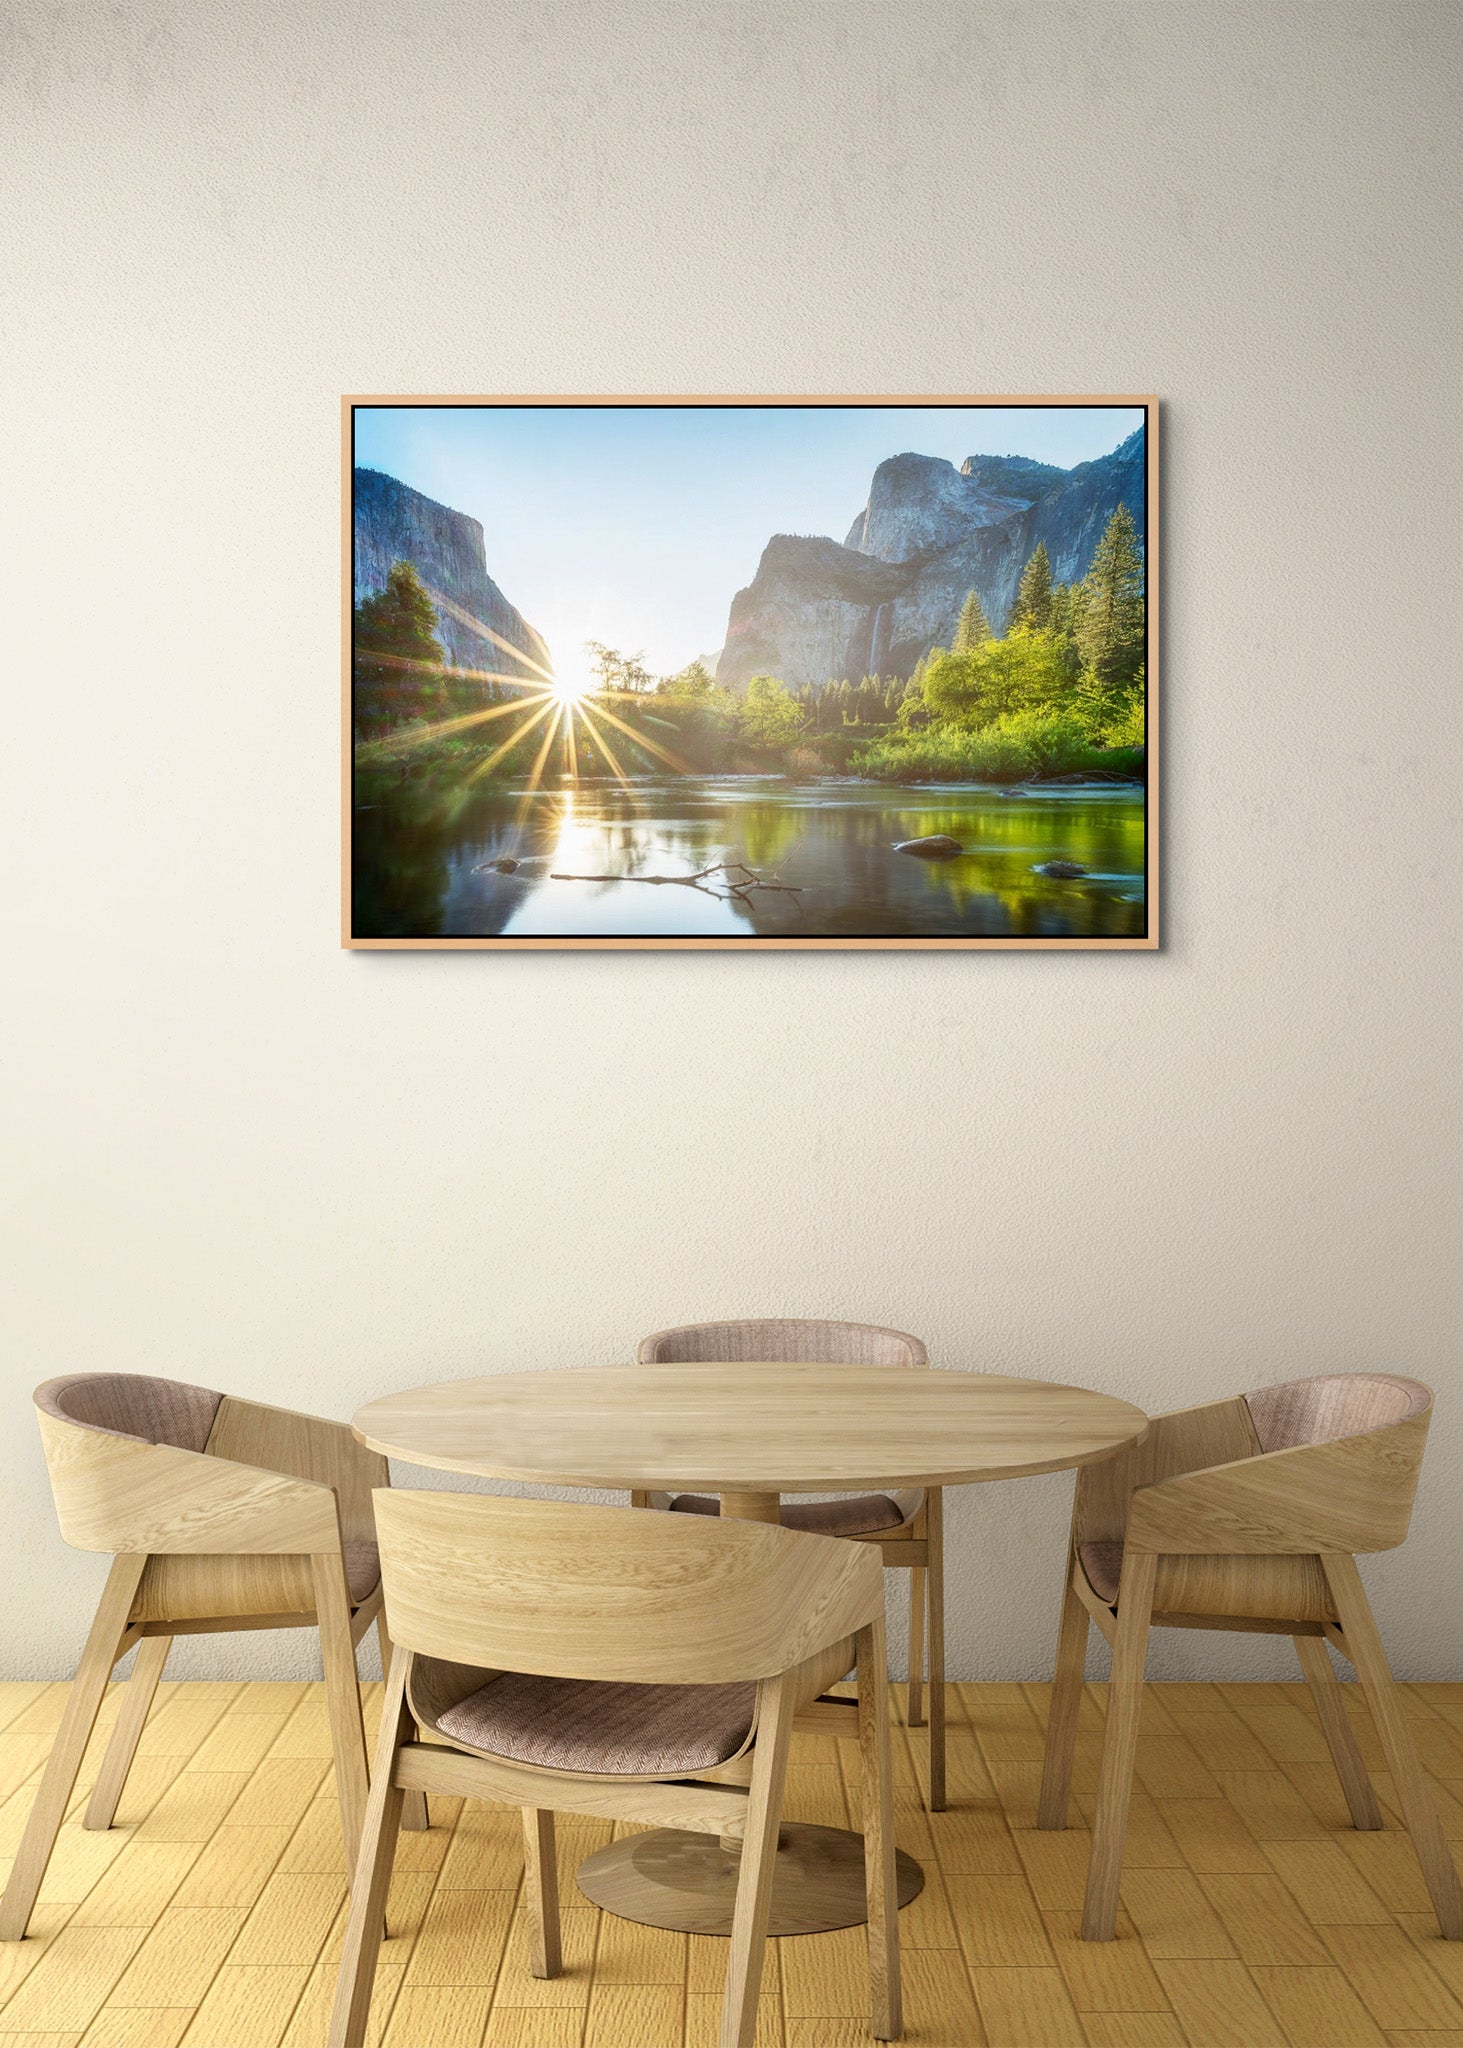 Picture hanging on the wall of a dining room. The picture is a fine art landscape photograph titled "Summer Valley View" by Cameron Dreaux of Dreaux Fine Art.